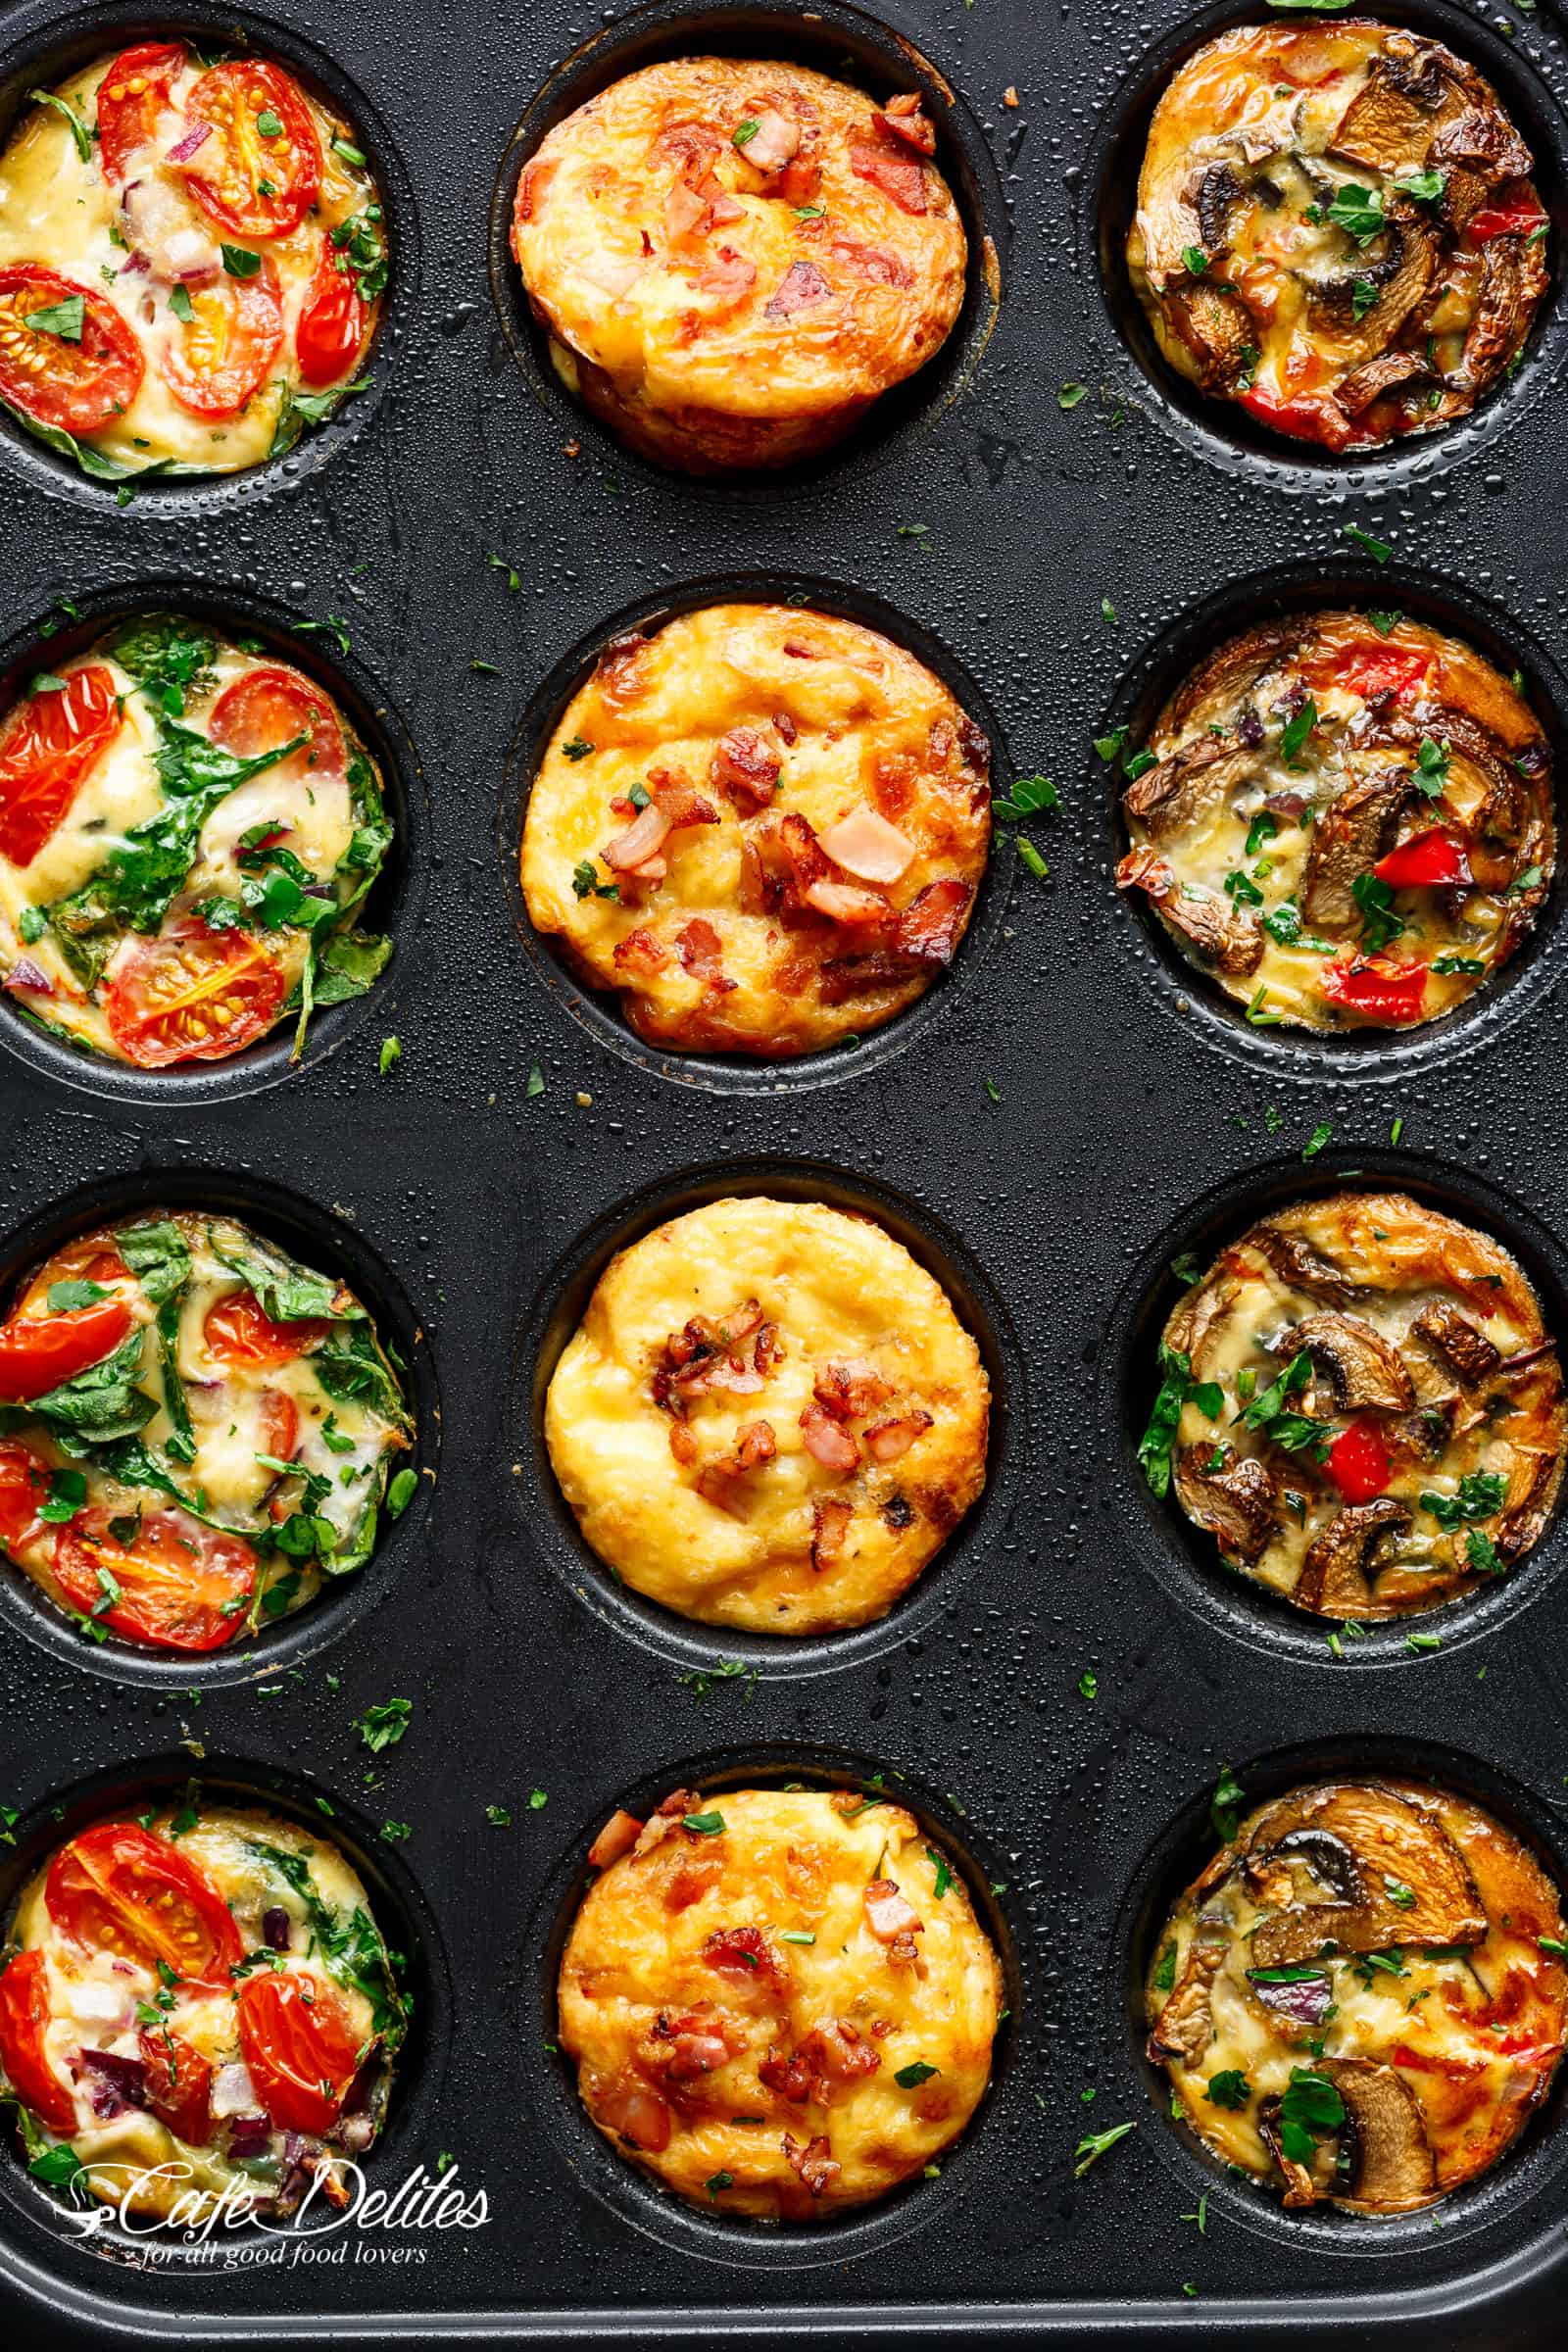 Breakfast Egg Muffins 3 Ways (Meal Prep) from cafedelites.com on foodiecrush.com